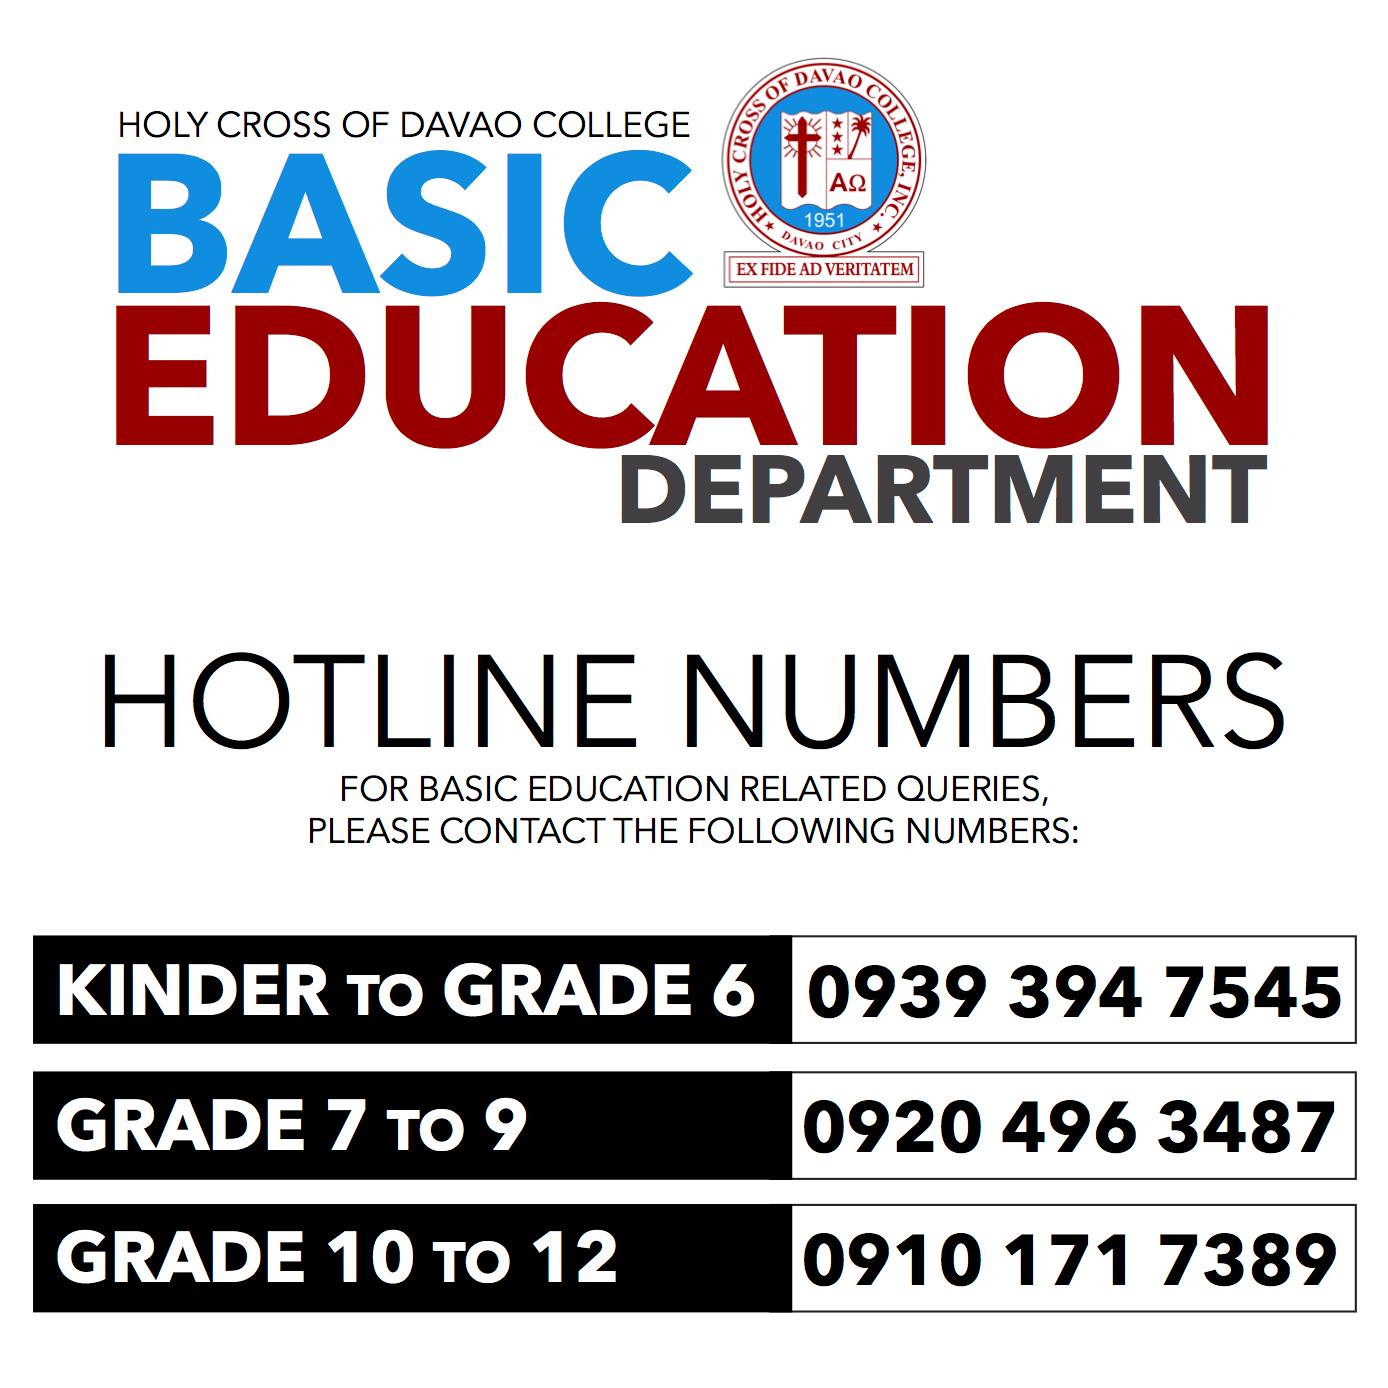 Enroll Now! Dial the no. below